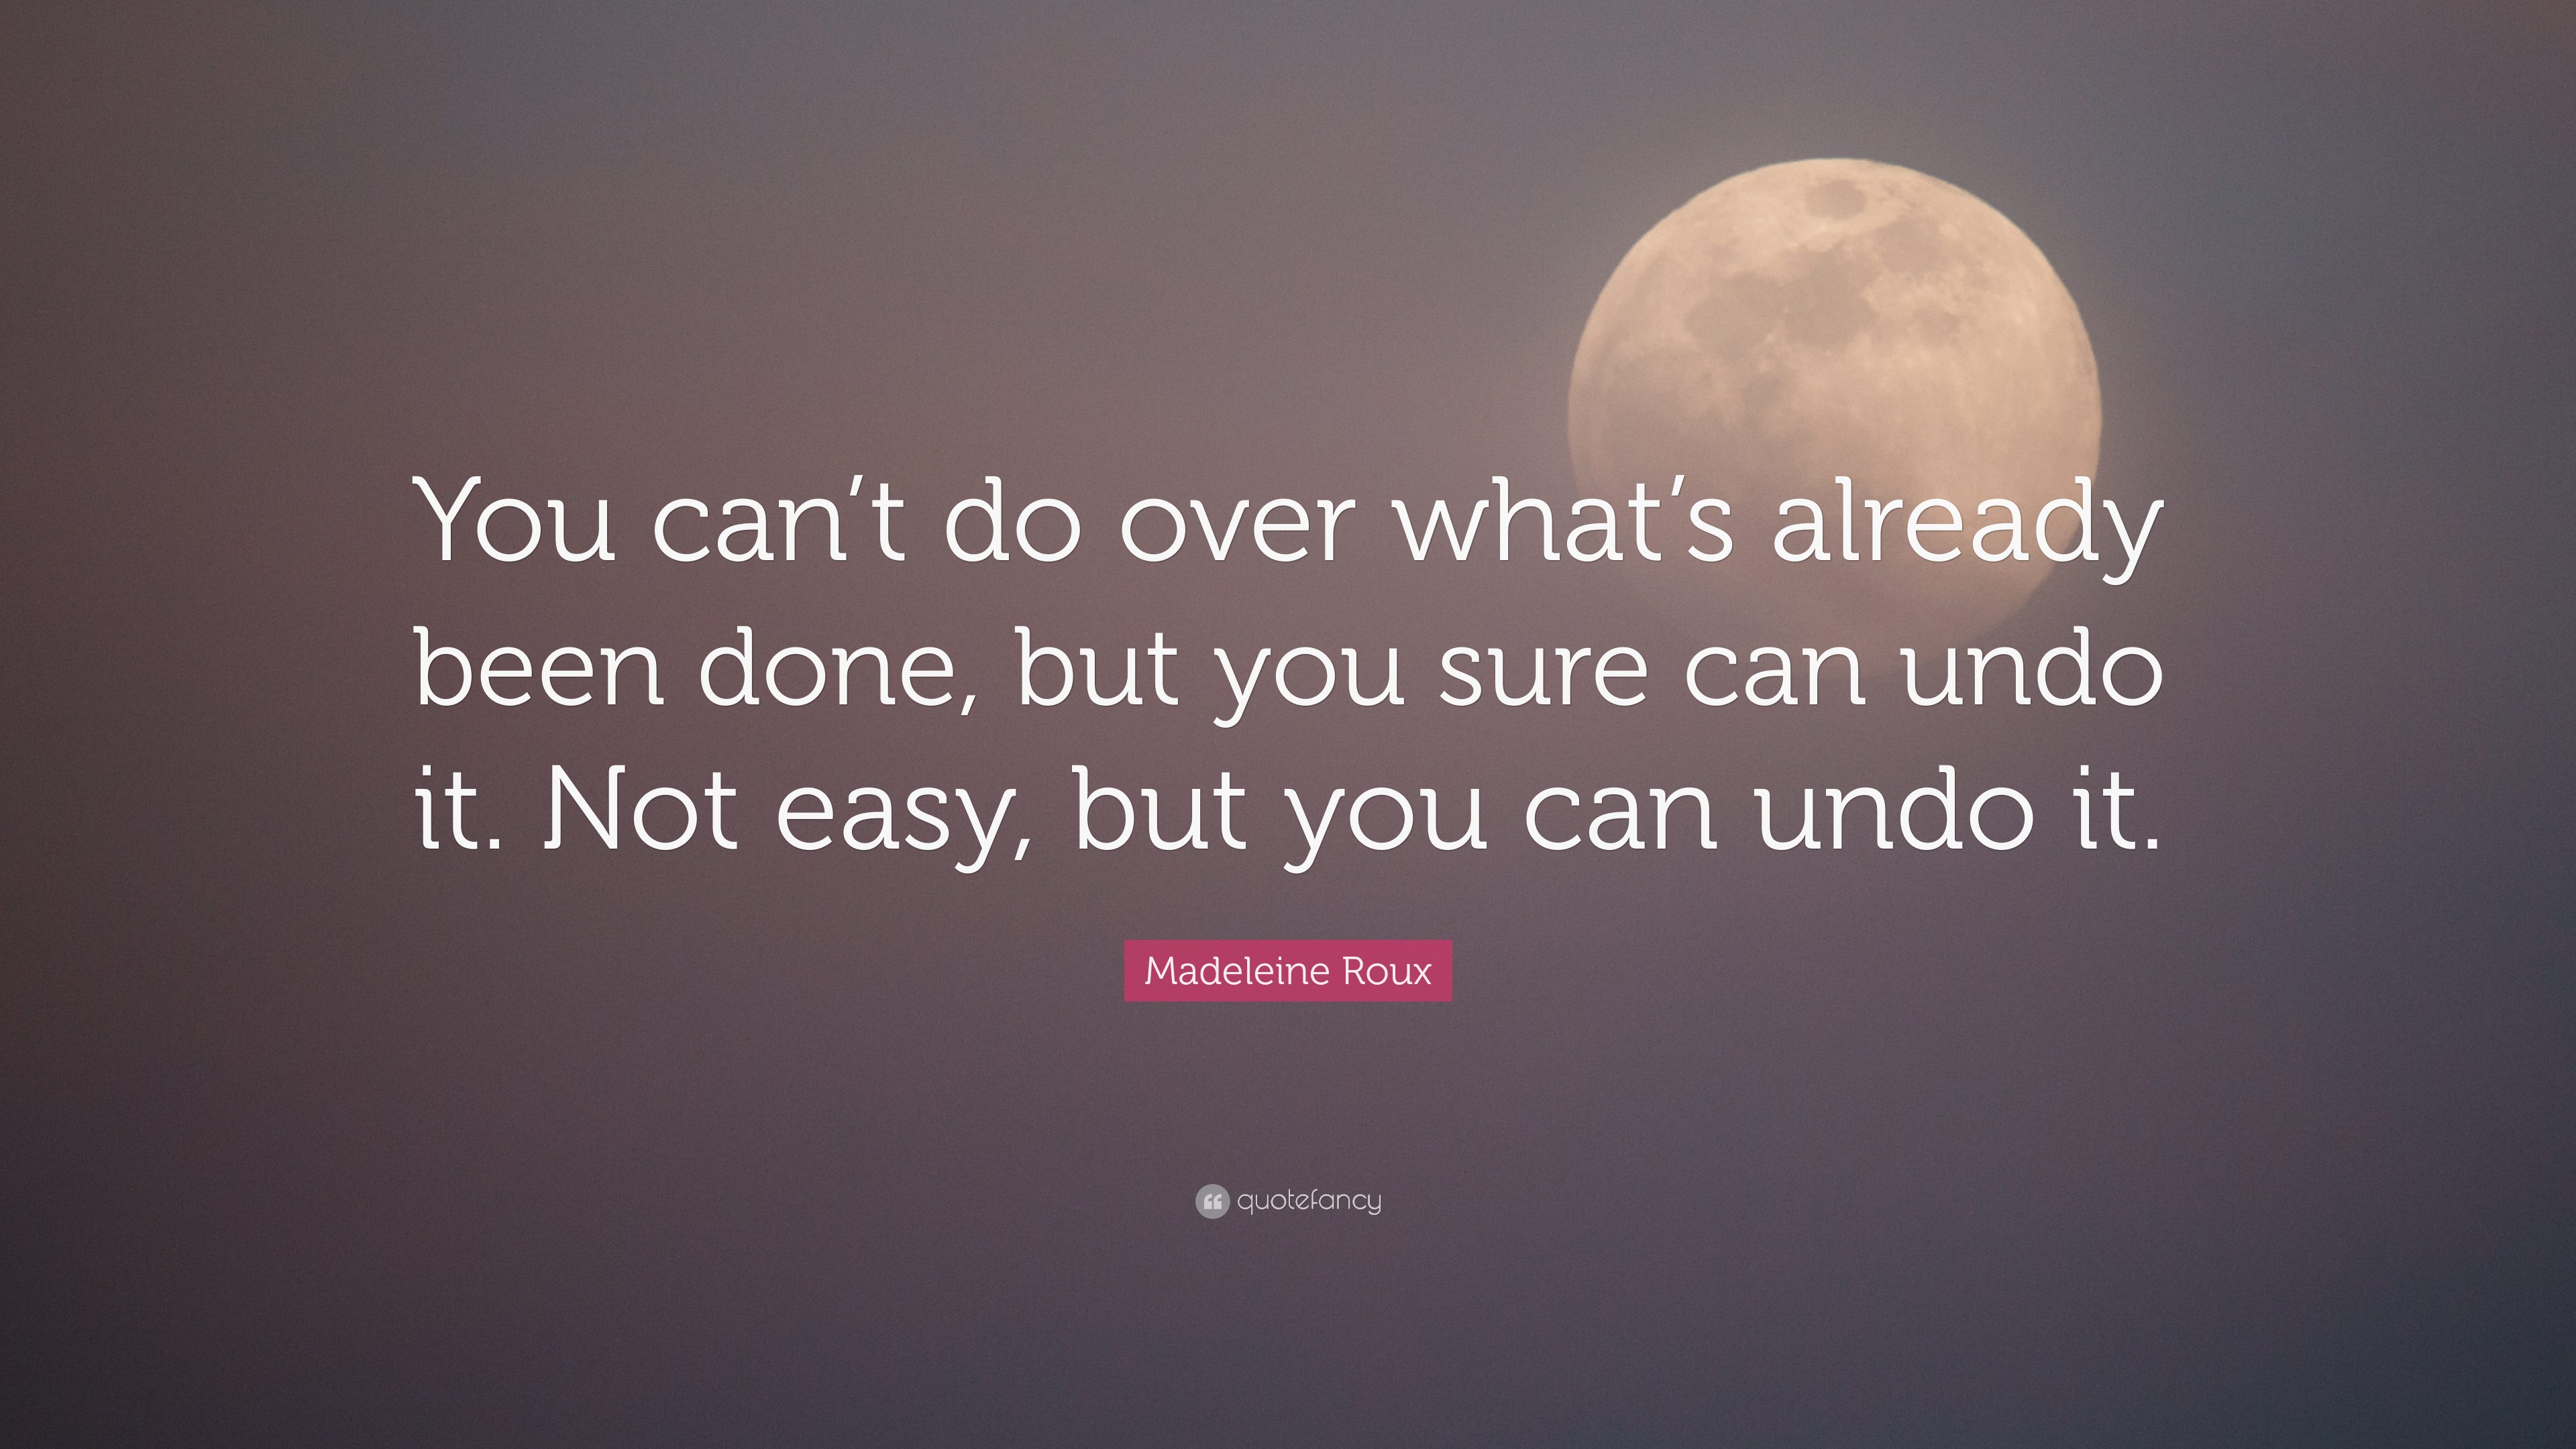 Madeleine Roux Quote: “You can’t do over what’s already been done, but ...